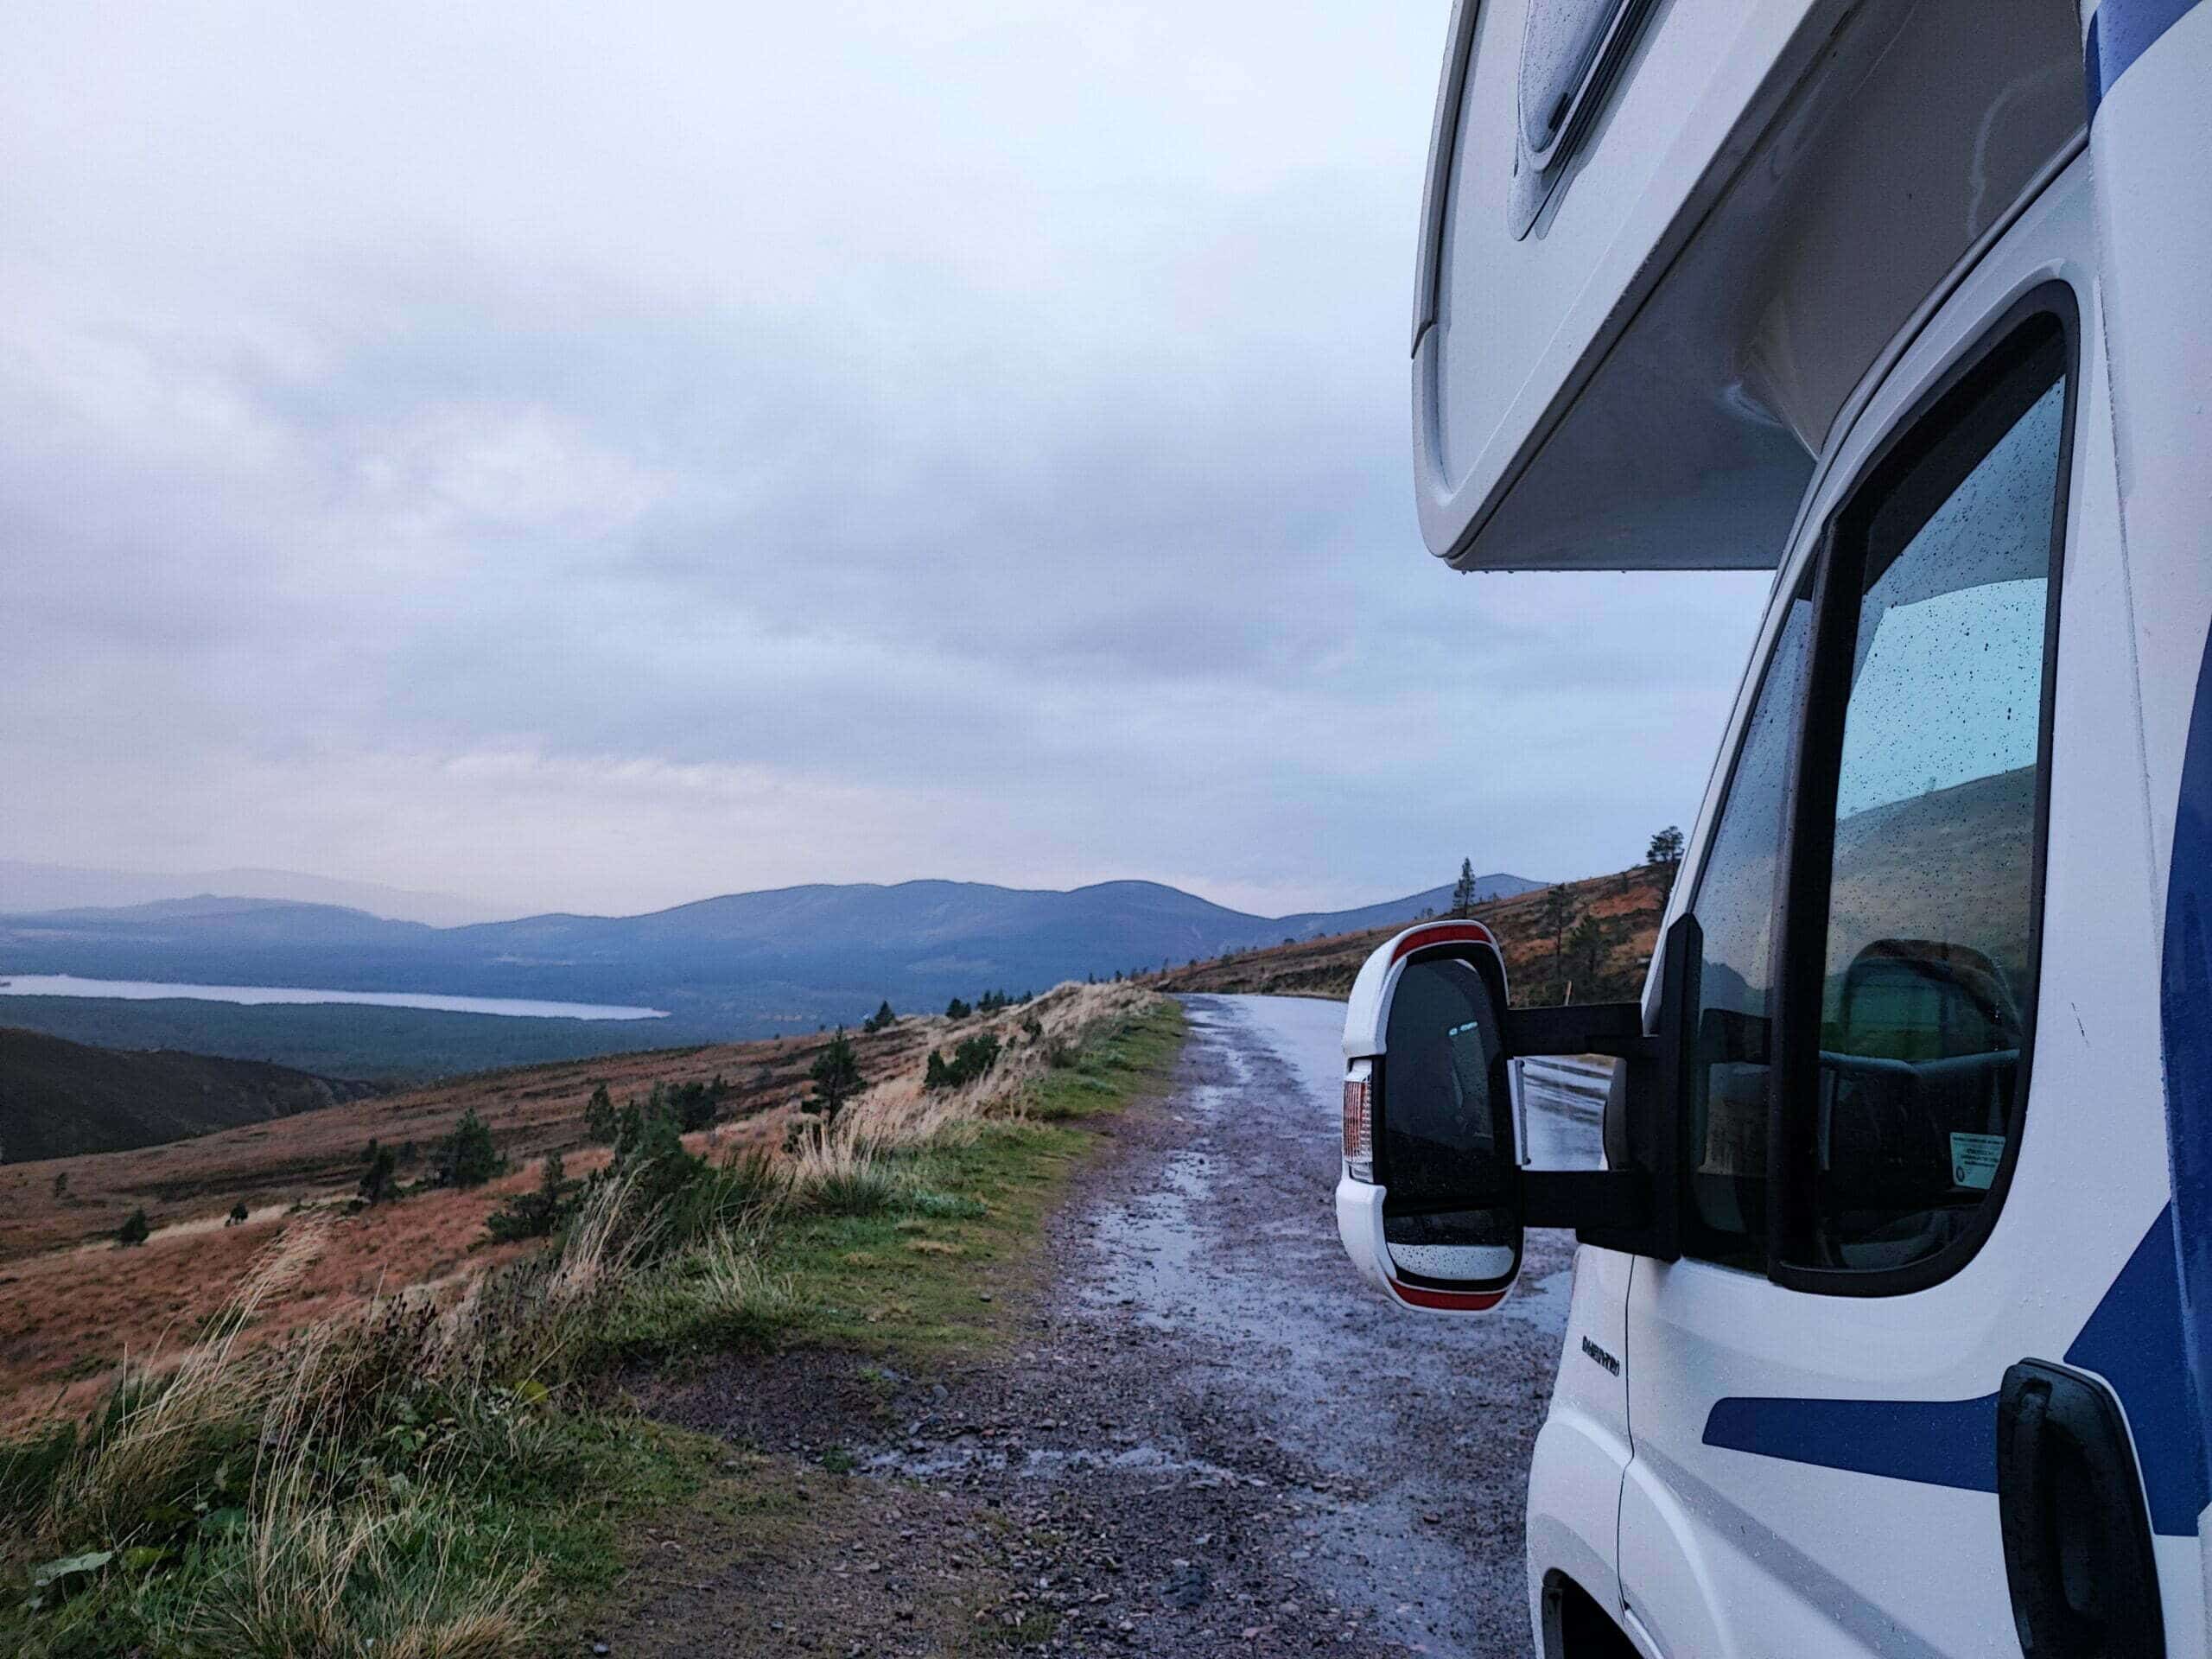 Read more about the article Kilts and Kilometers: A motorhome adventure through Scotland as a guide for your next trip